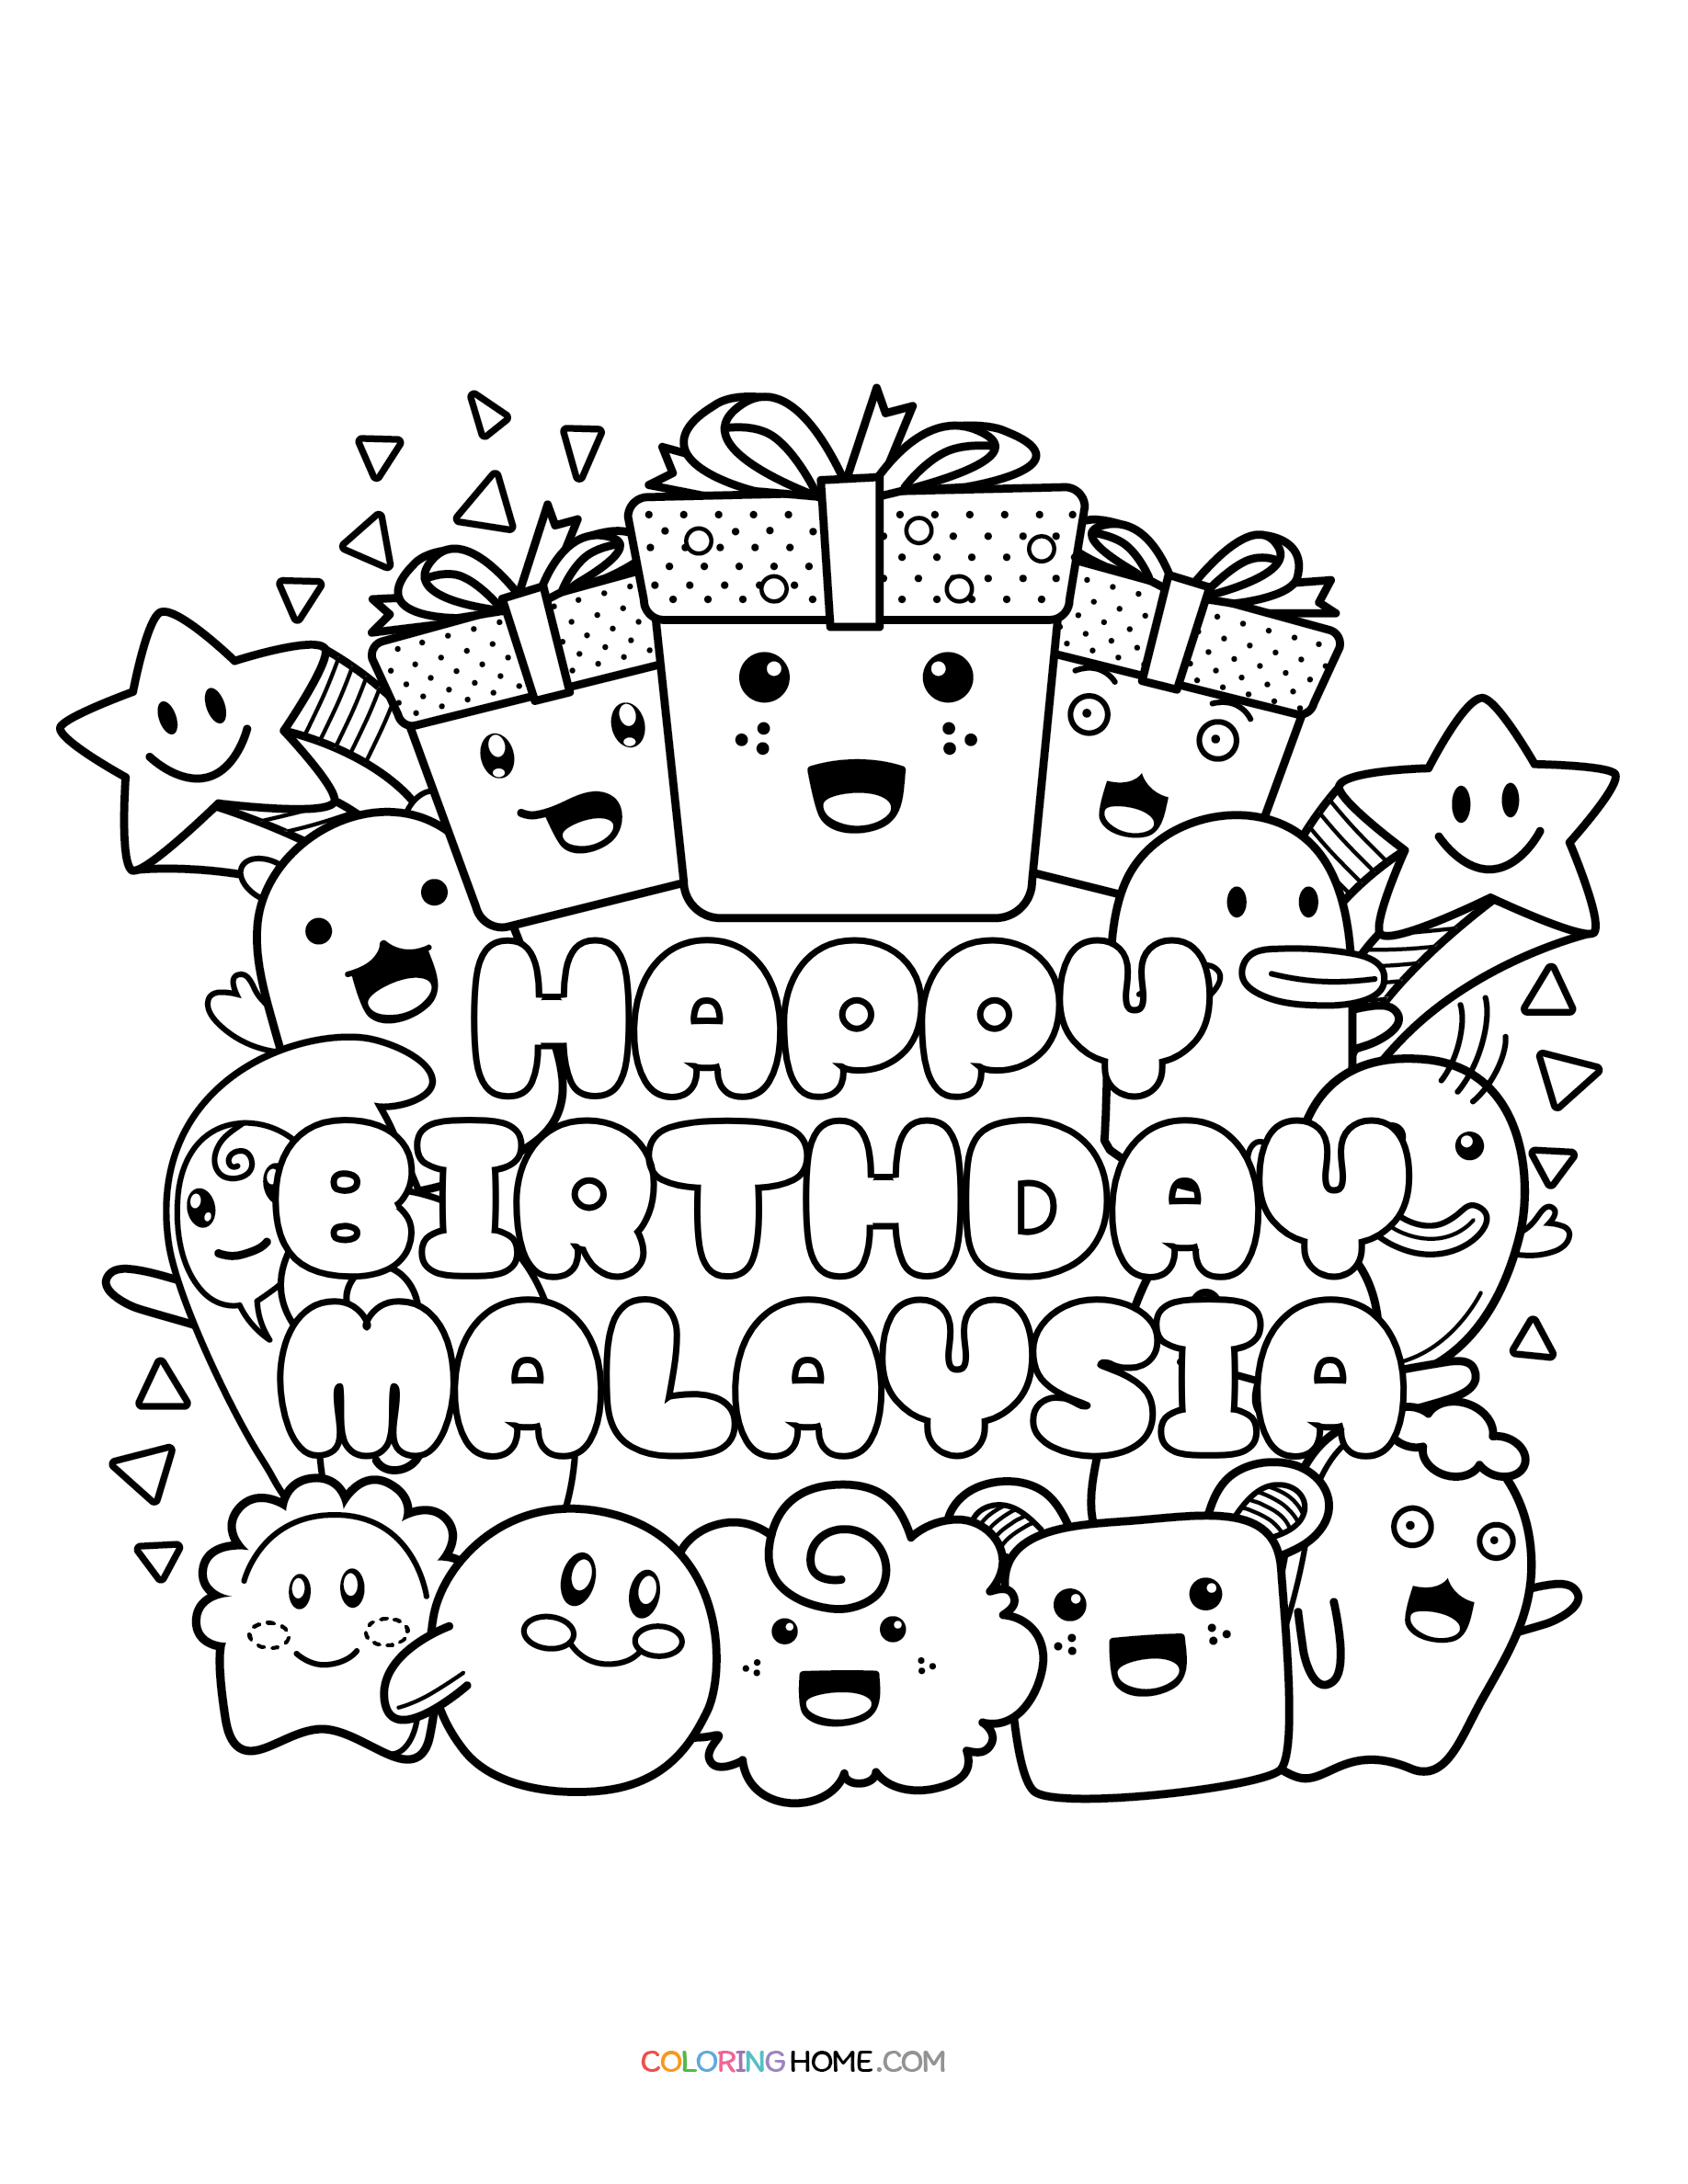 Happy Birthday Malaysia coloring page